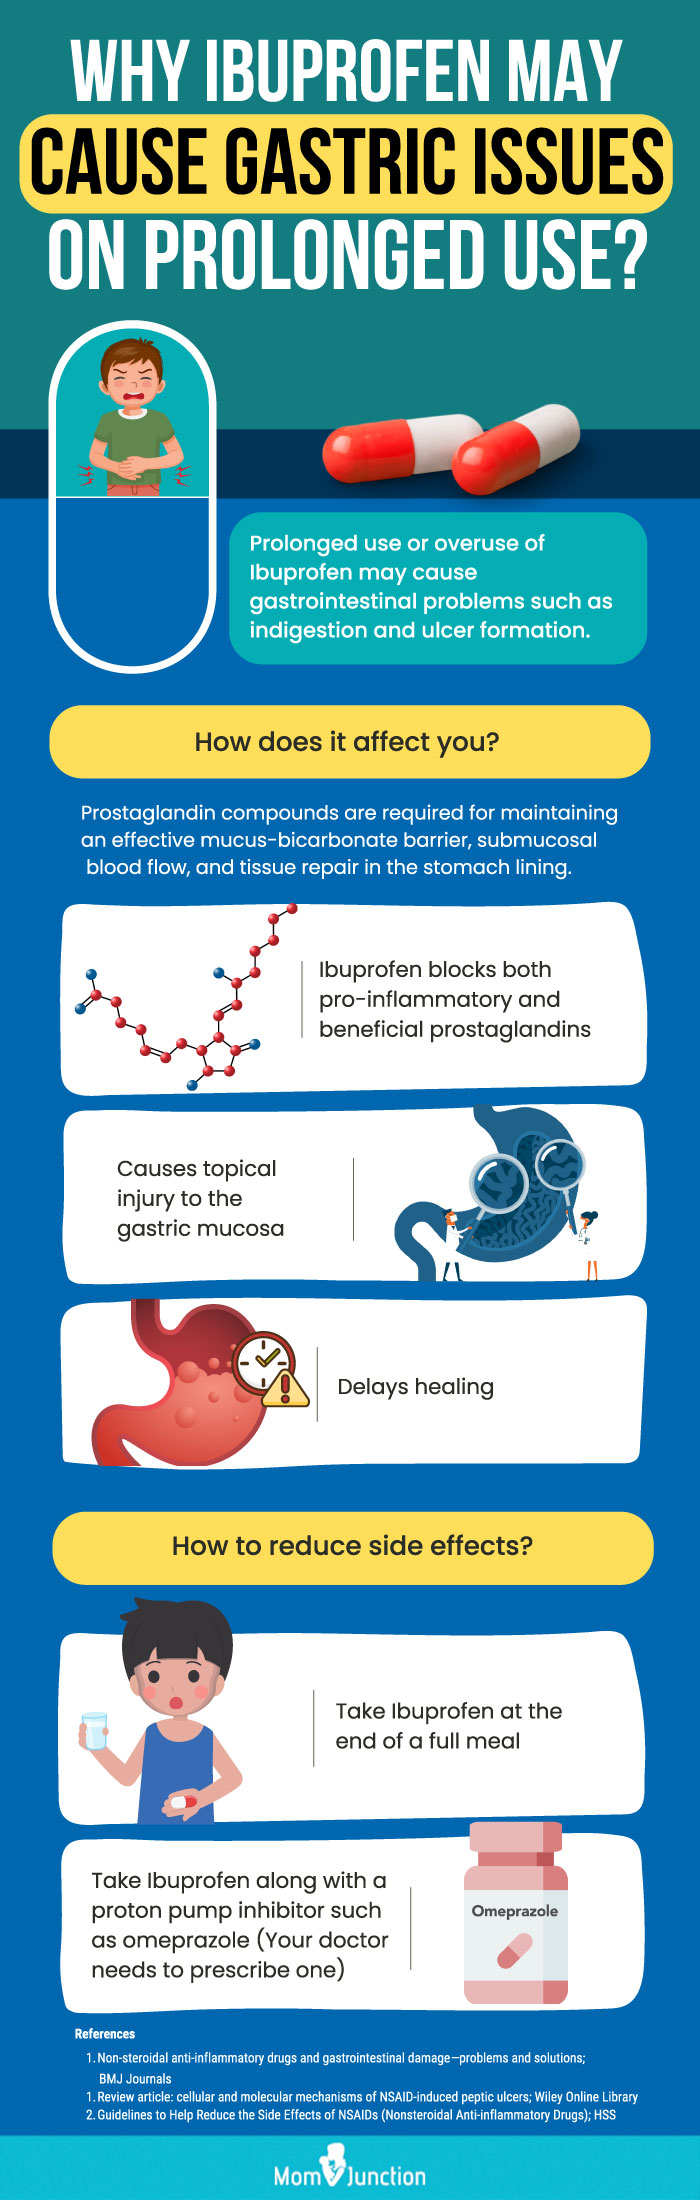 why ibuprofen may cause gastric issues on prolonged use (infographic)